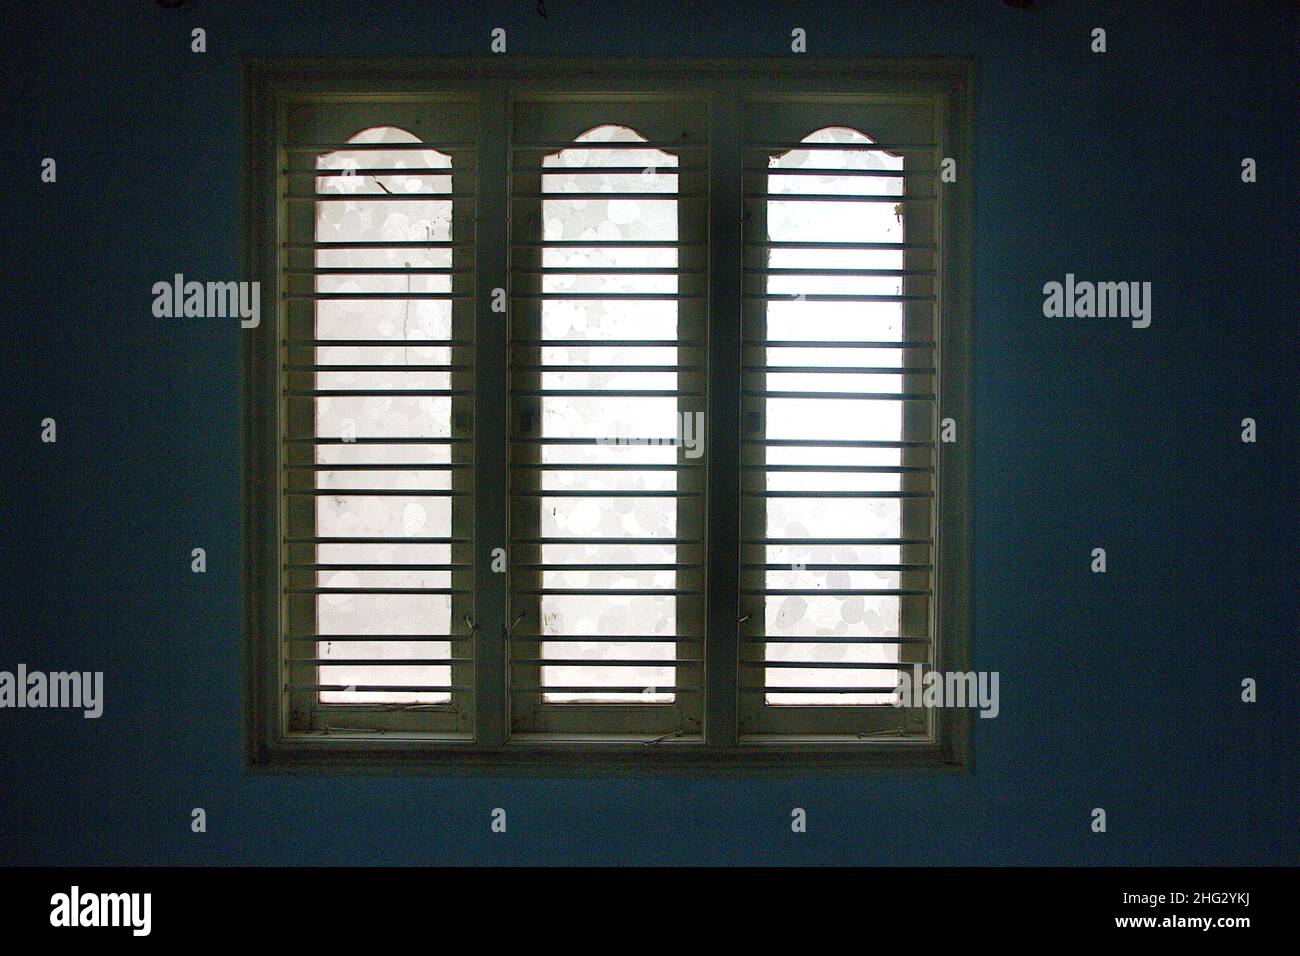 Wooden window frame with safety bars and glass panels viewed from inside room Stock Photo